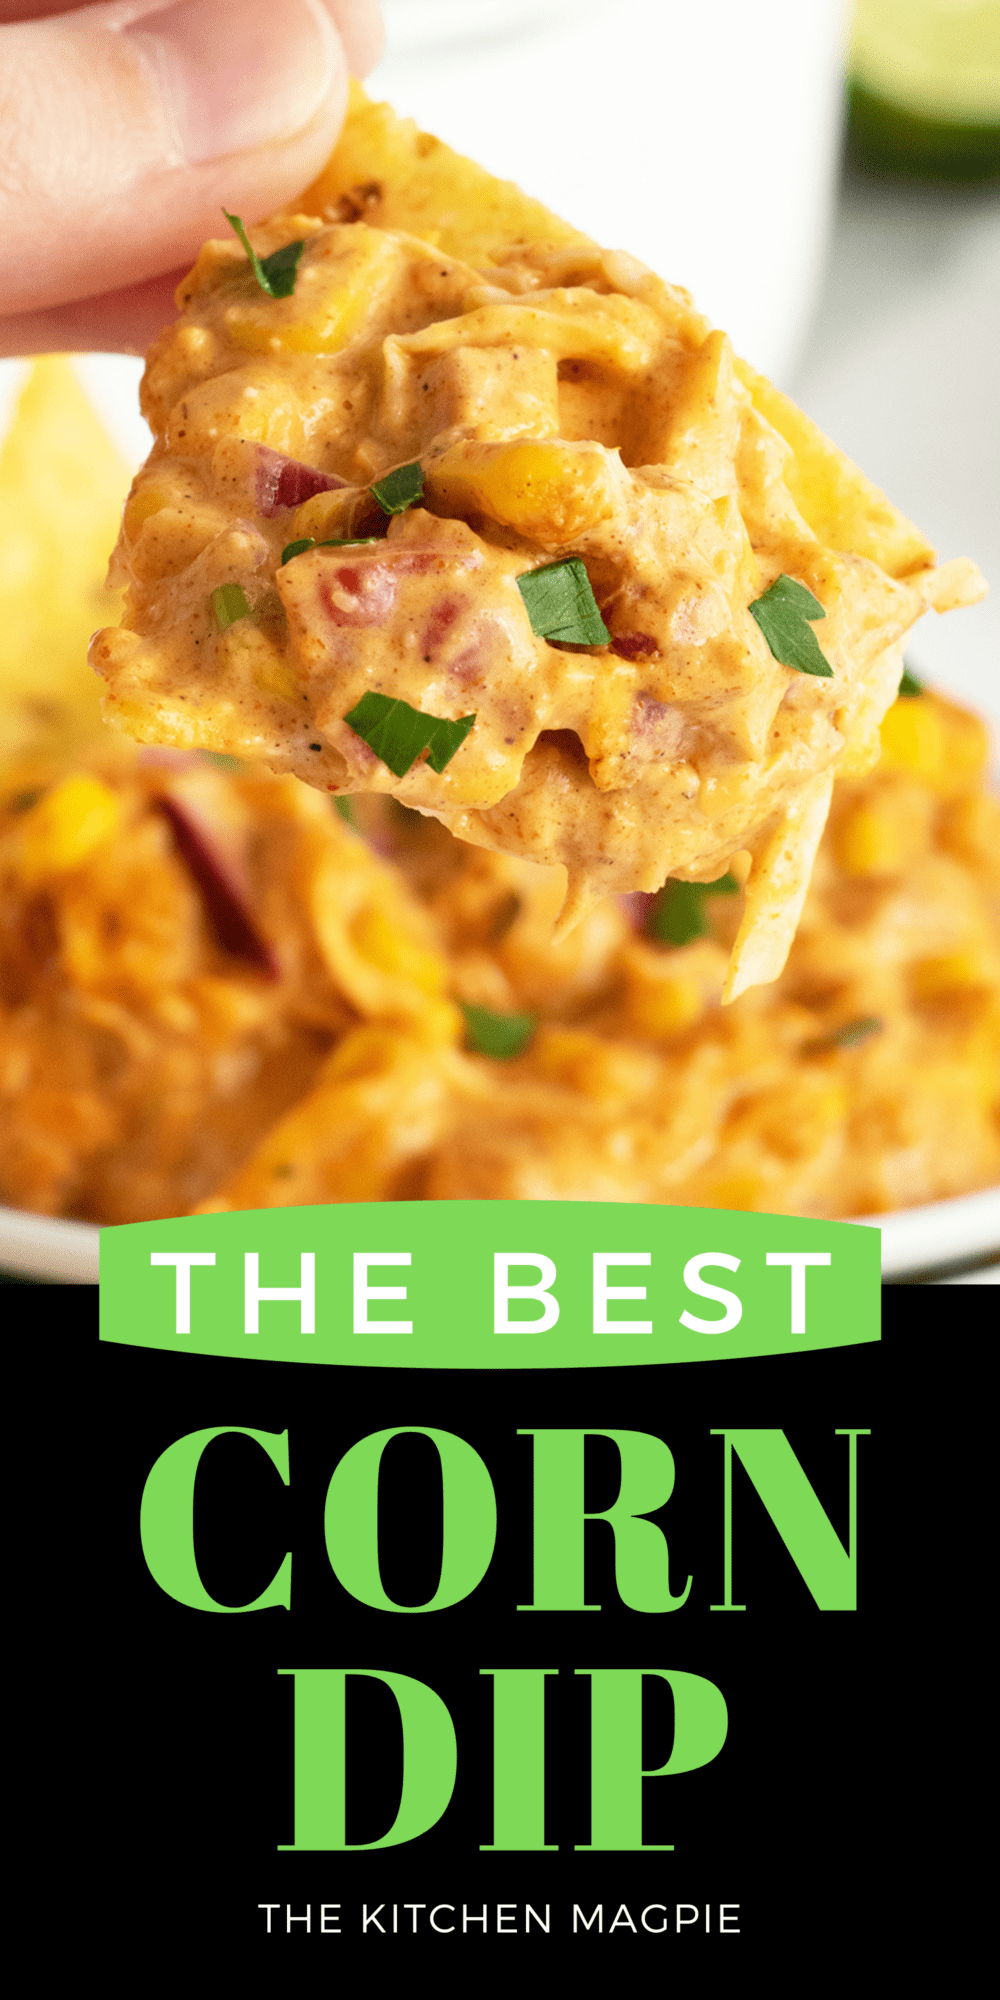 Use this robust, savory, and tangy corn dip as a party dip, or just eat it on bread or with a spoon and enjoy!